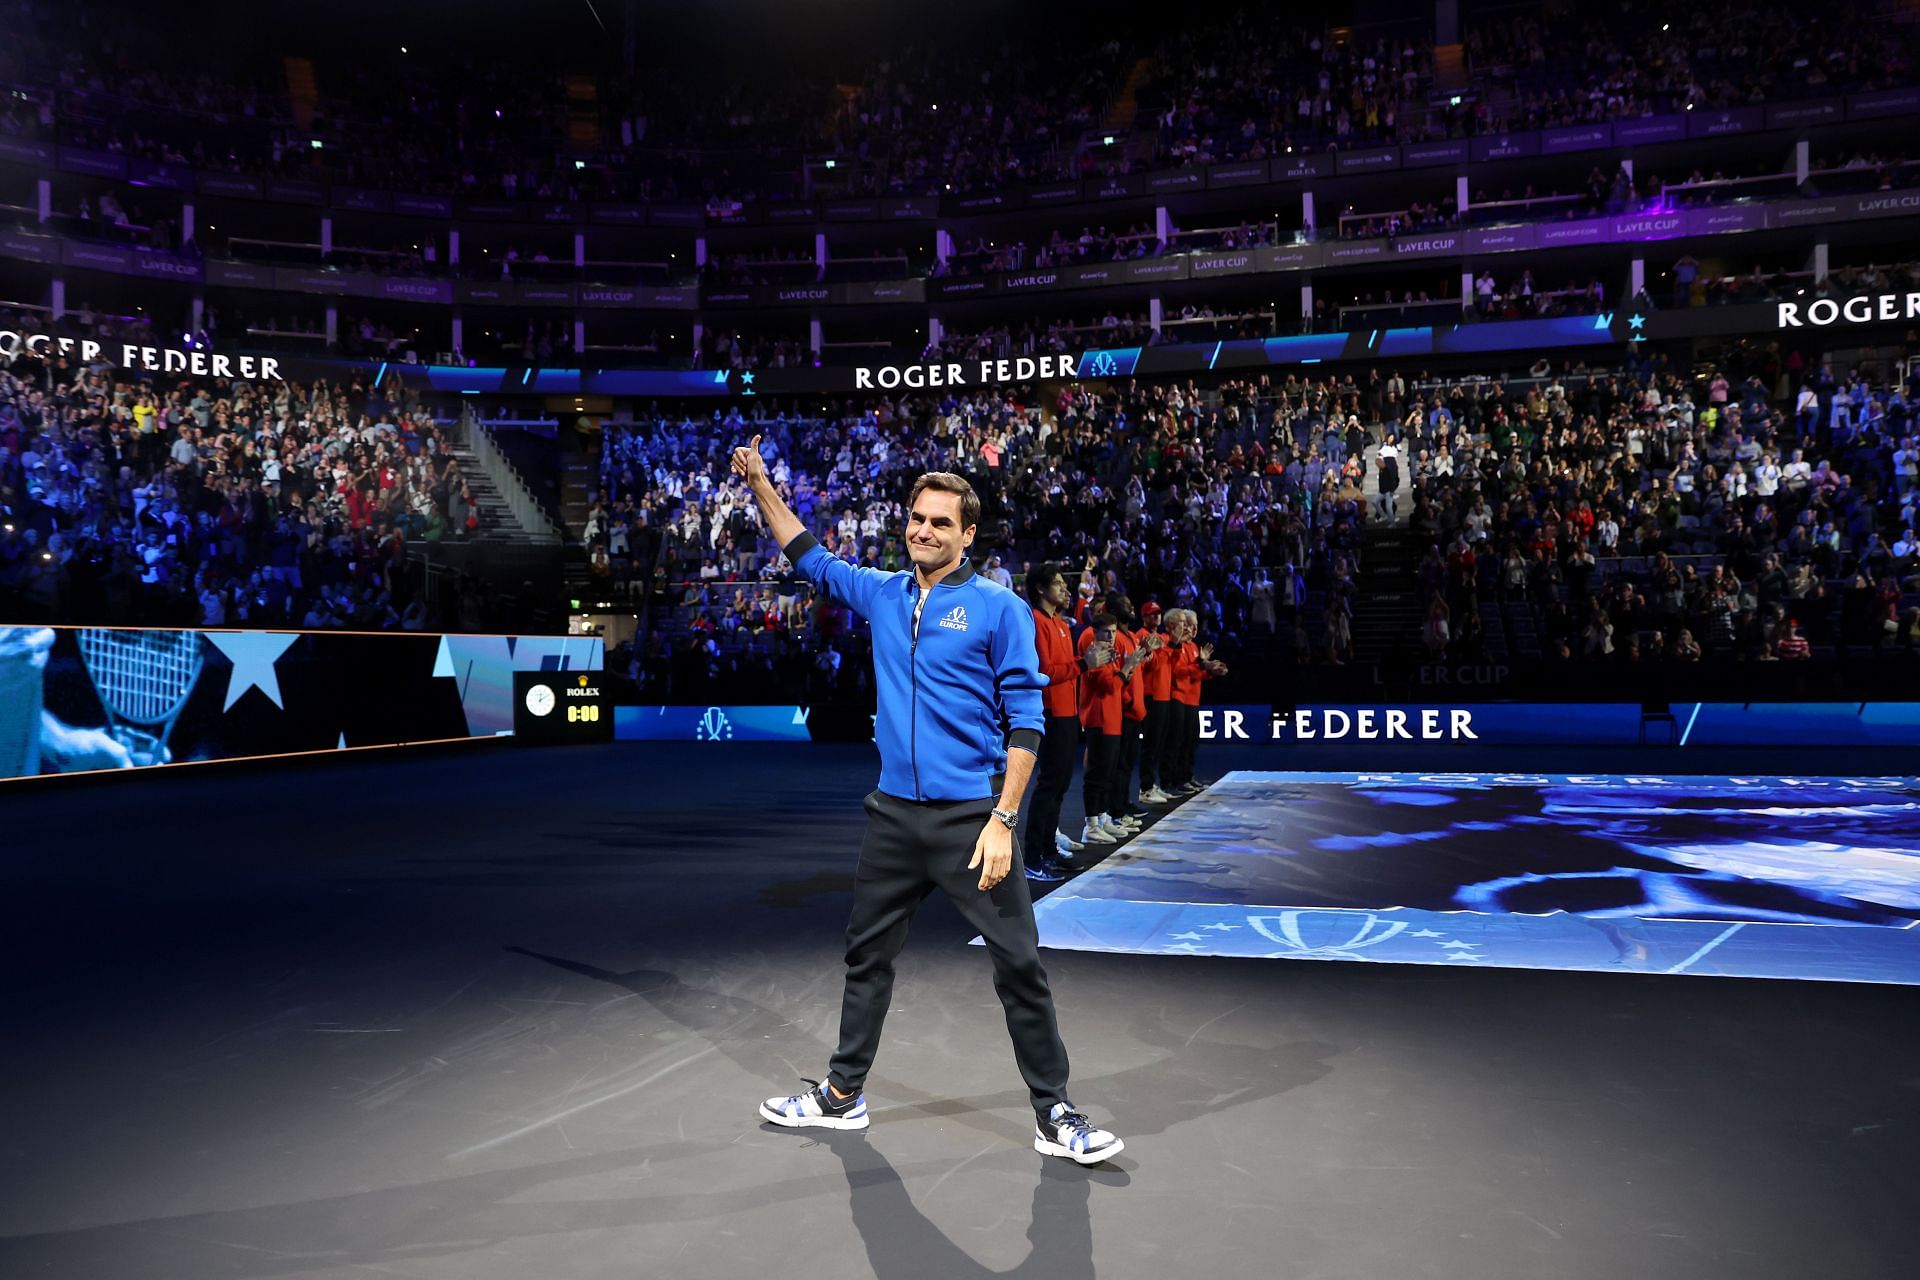 The Swiss legend at the Laver Cup 2022.